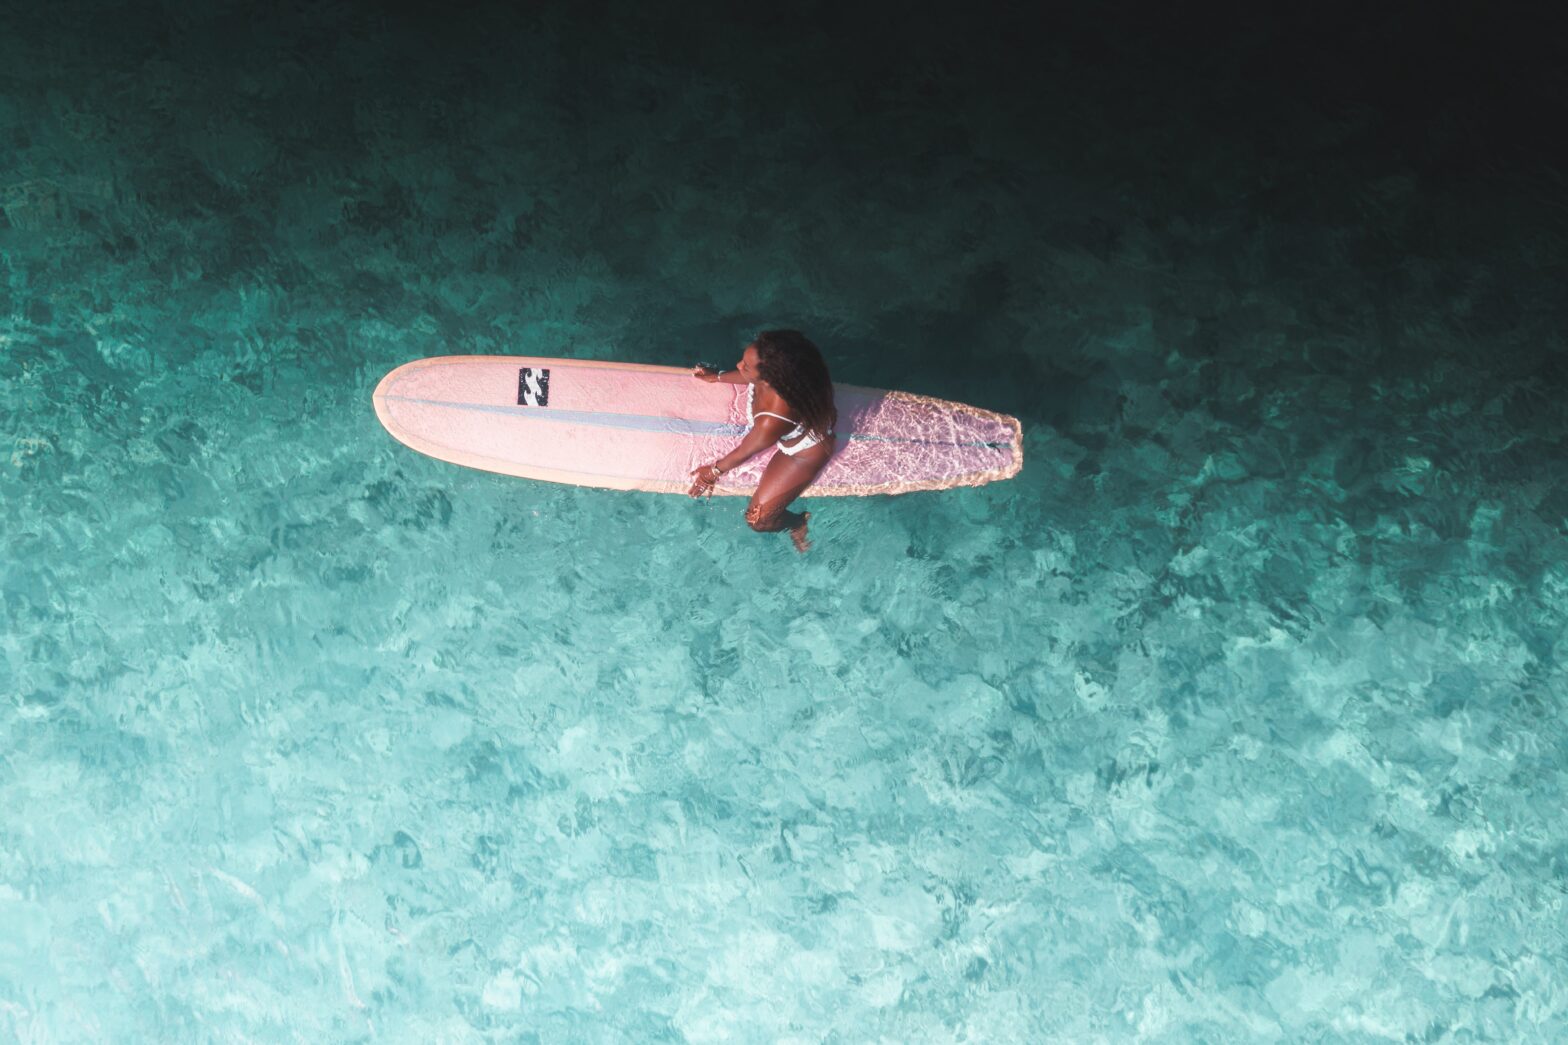 Black Women Surfers Are Making Waves on The Internet